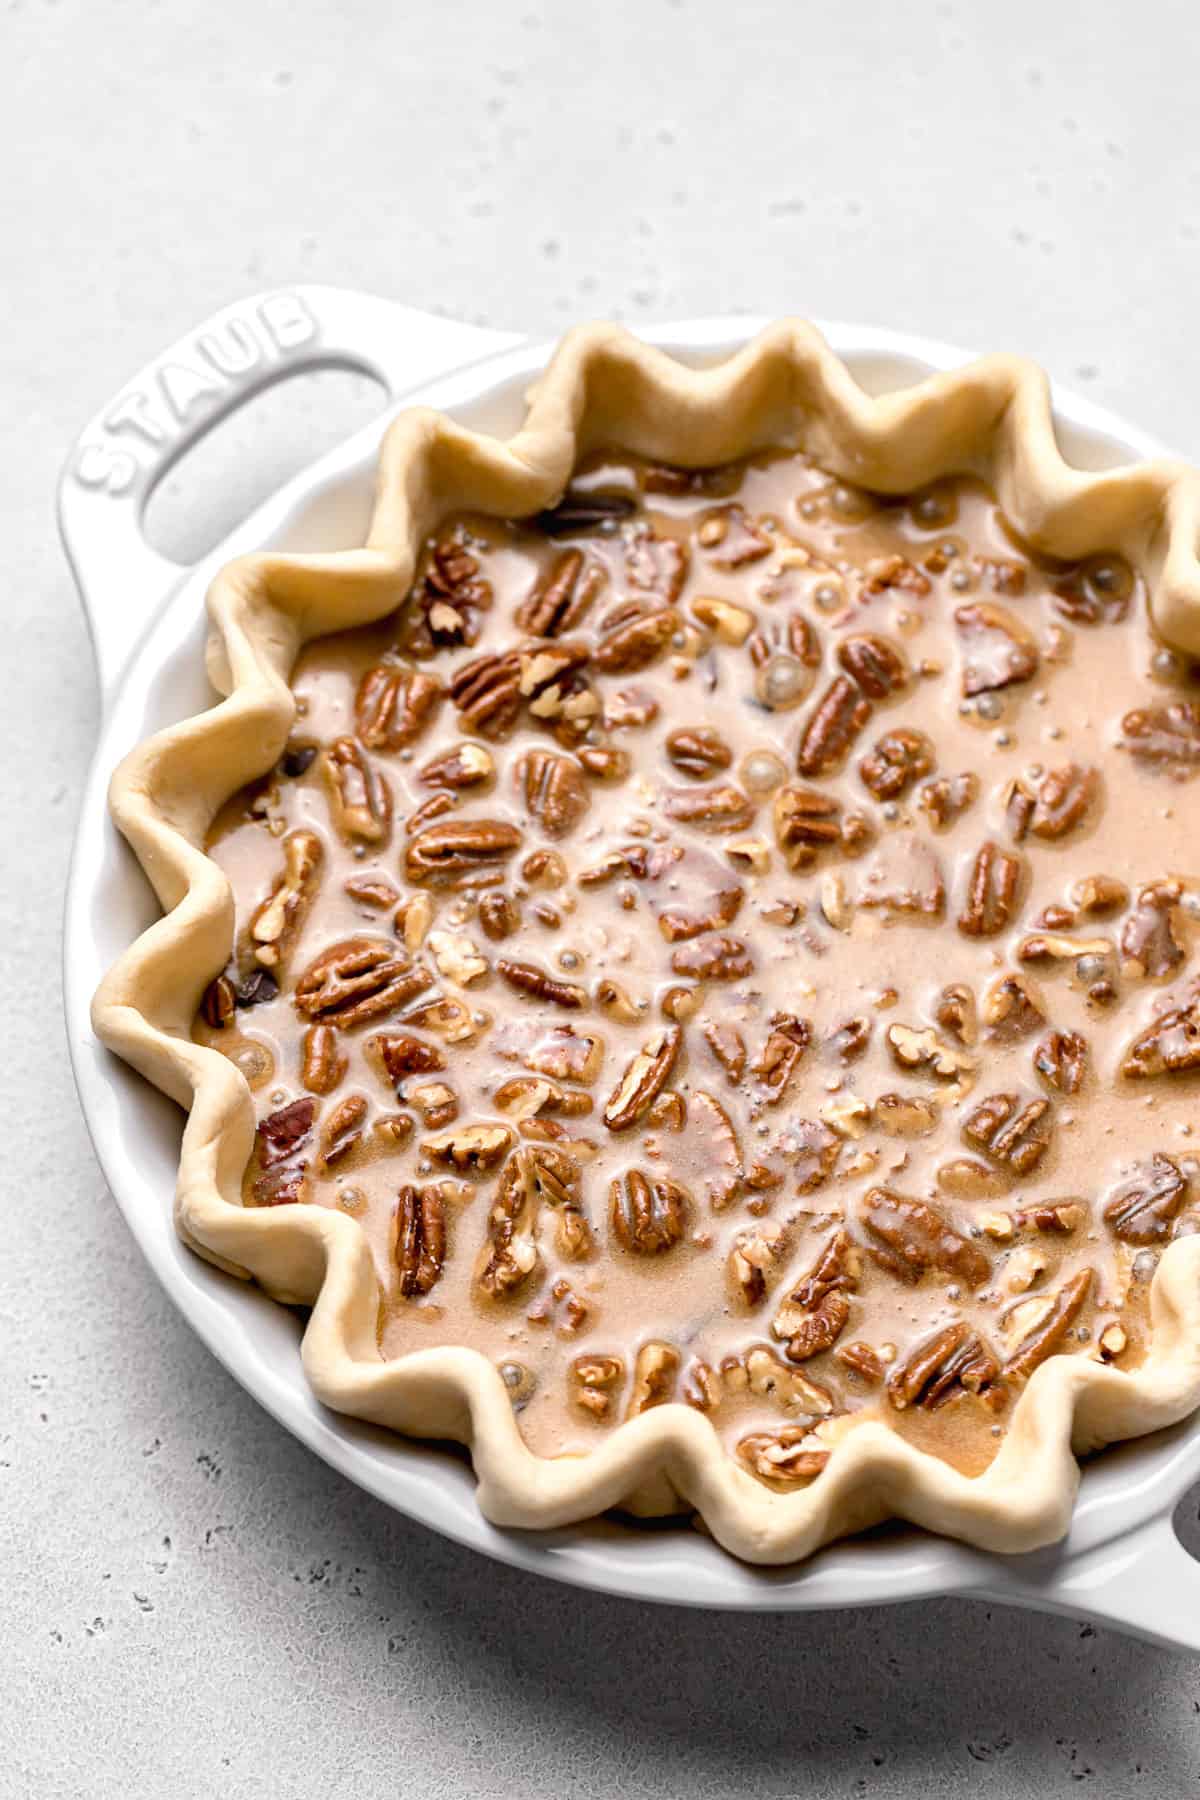 caramel filling poured over pecans and chocolate chips in pie dough